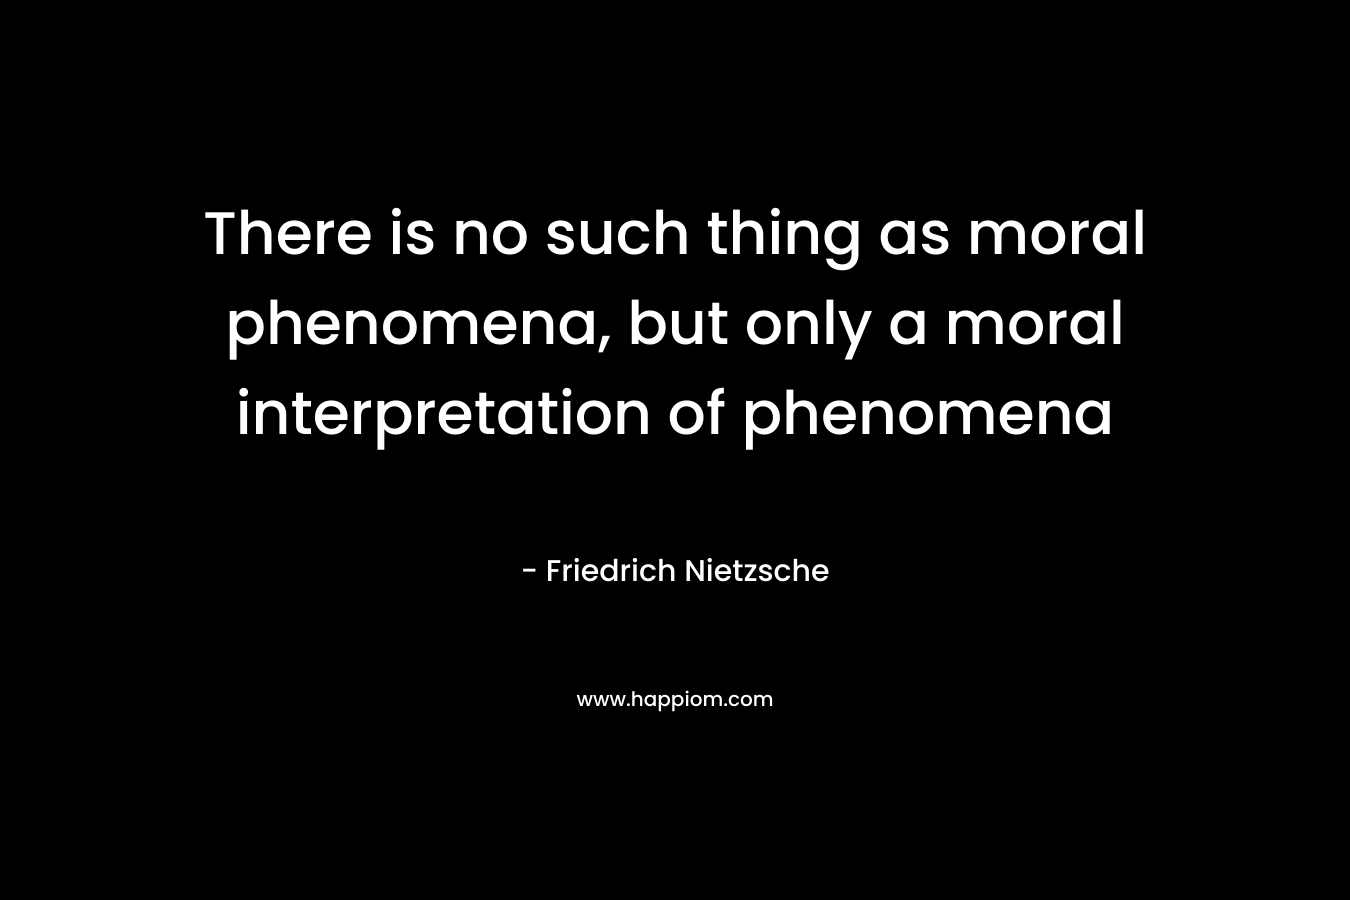 There is no such thing as moral phenomena, but only a moral interpretation of phenomena